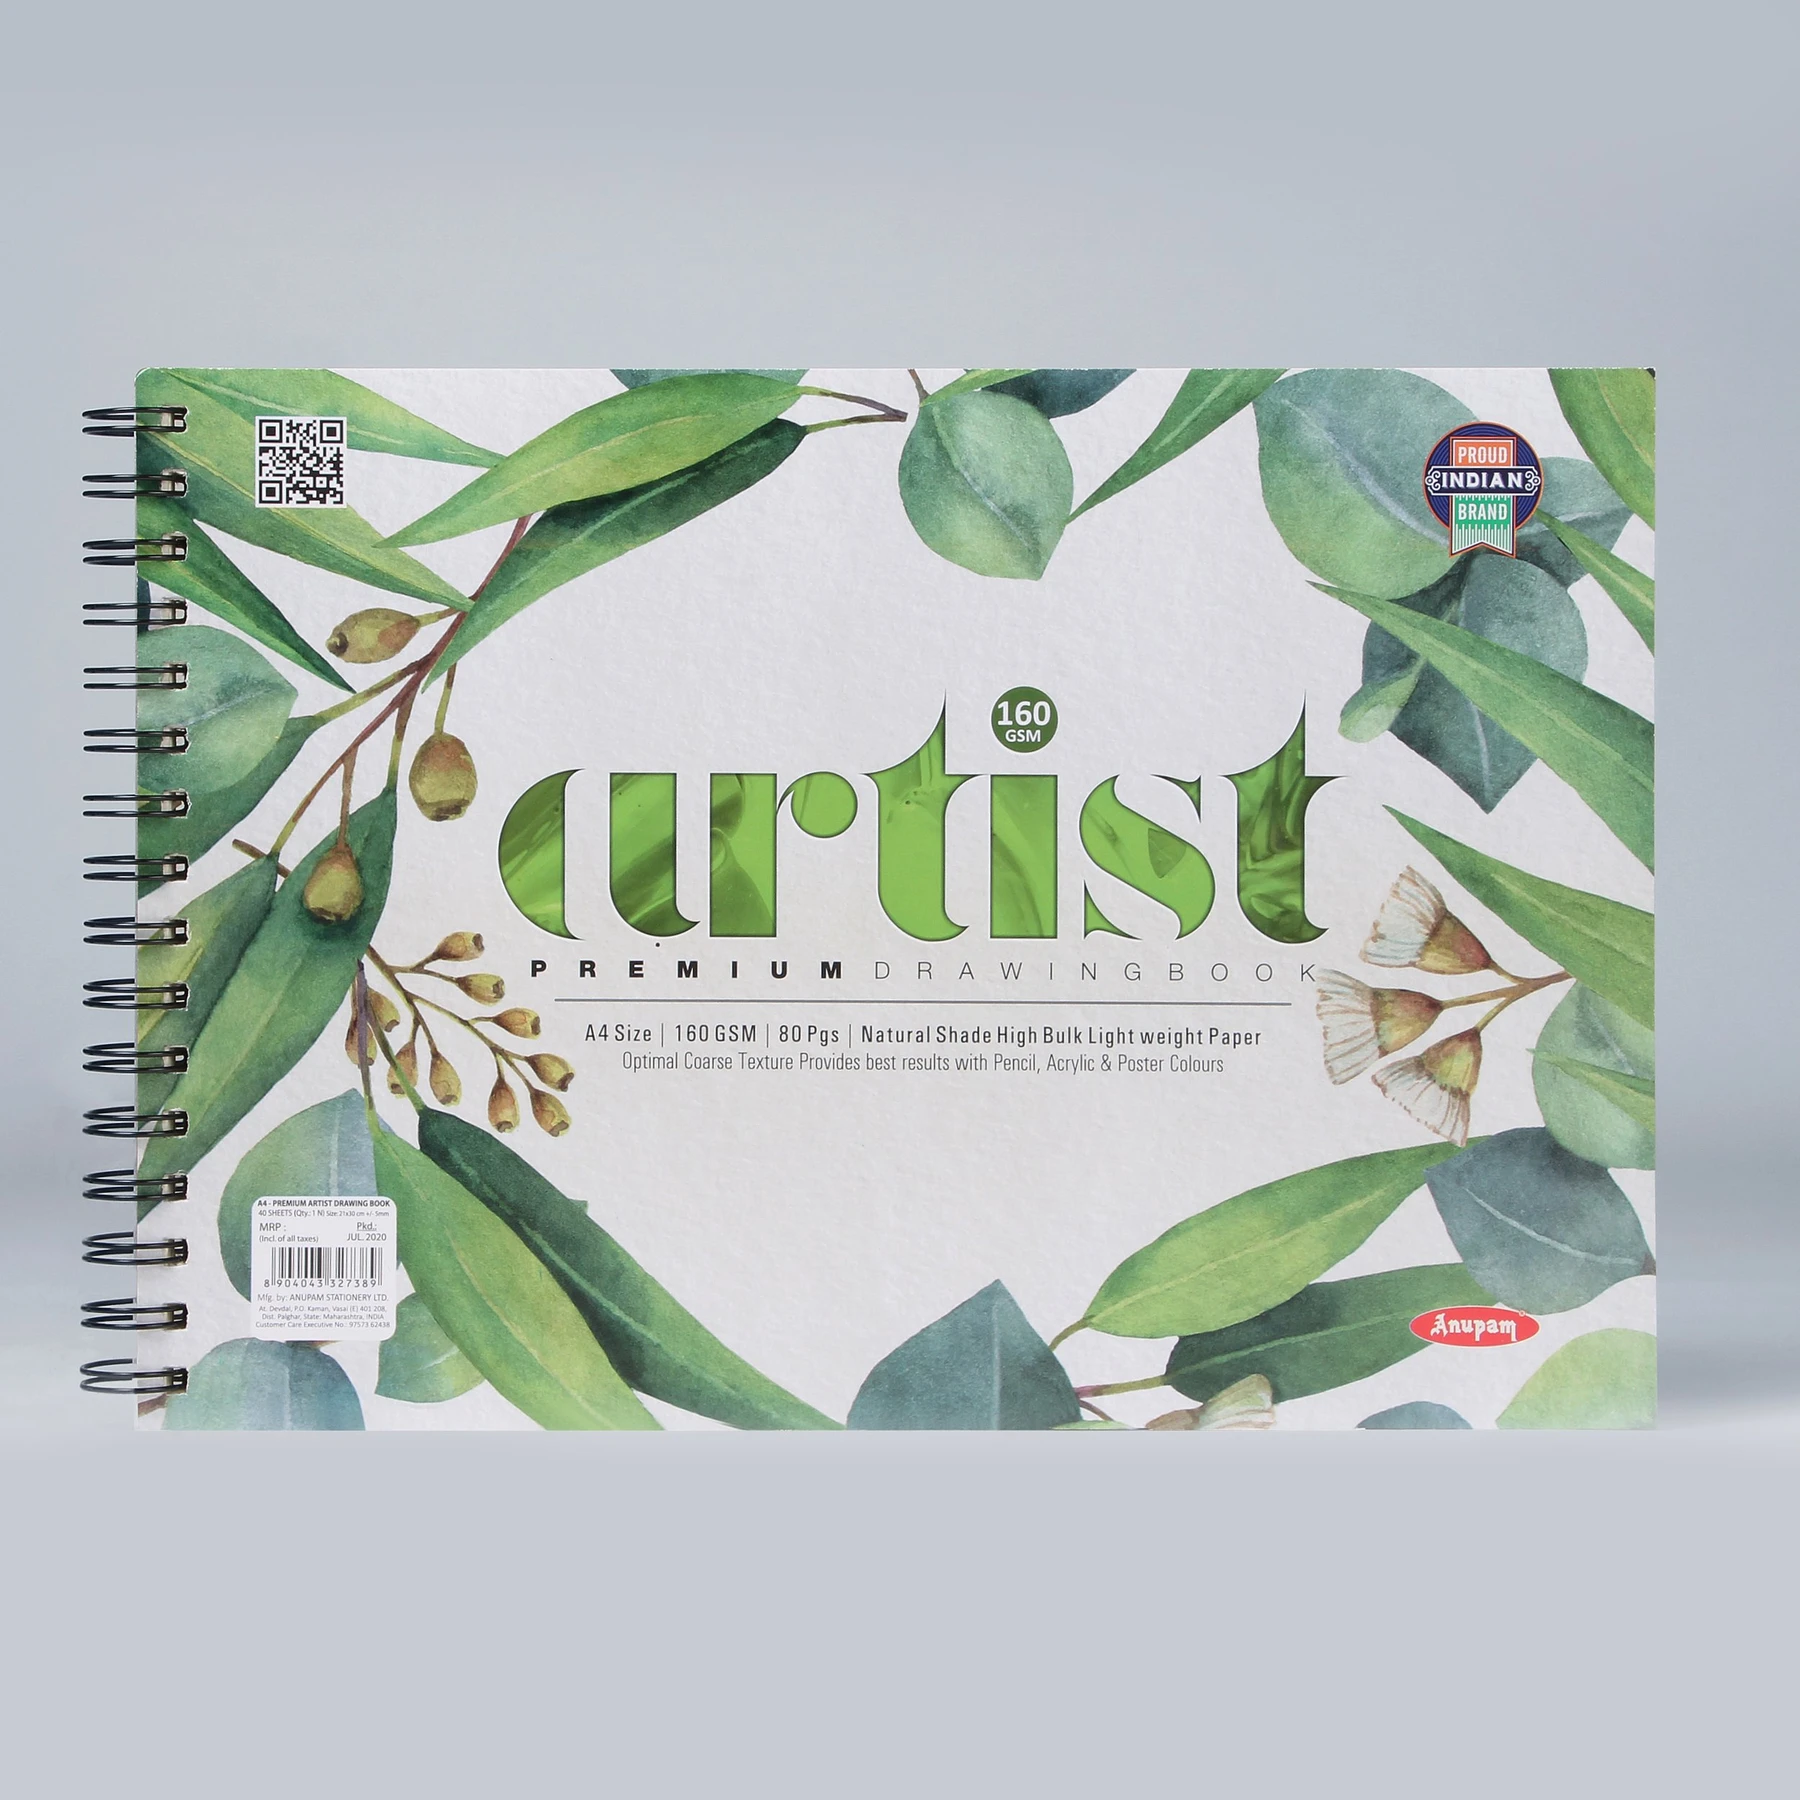 ANUPAM ARTIST PREMIUM DRAWING BOOK A4 (160 GSM, 80 PAGES)